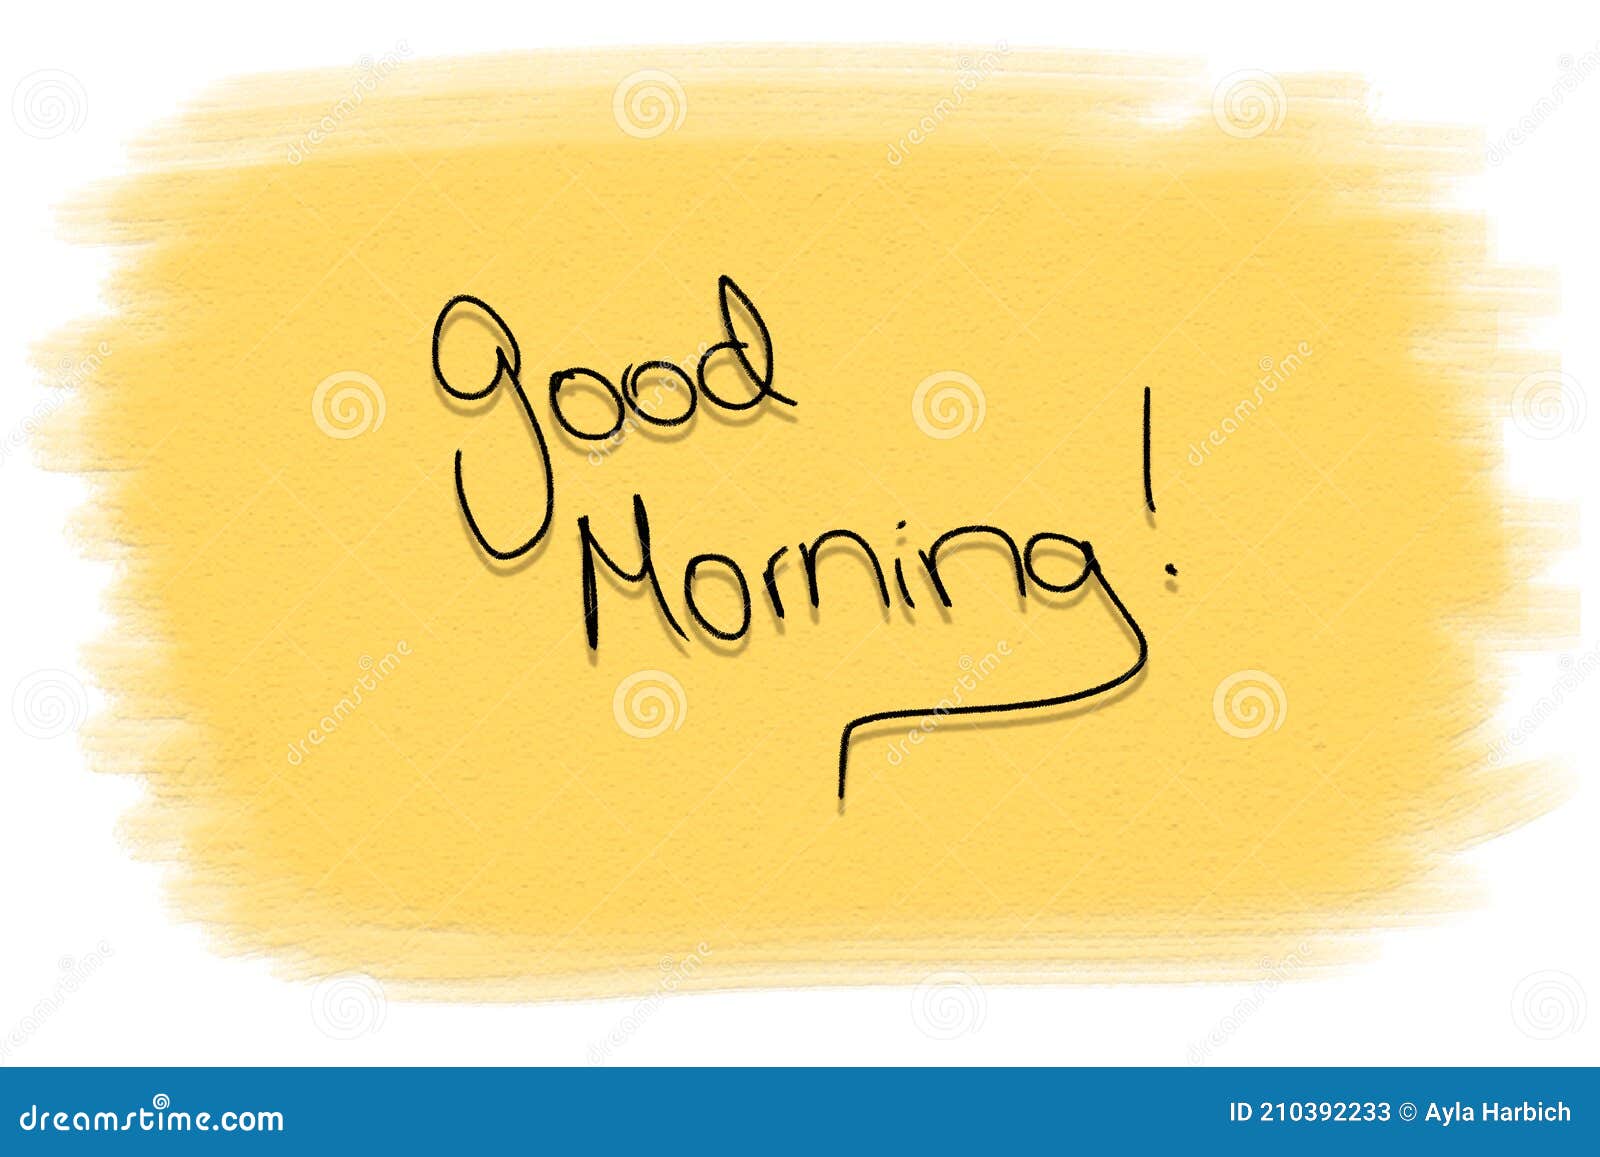 Good Morning, Text, Pastel Background, Simple, Message, Hand ...